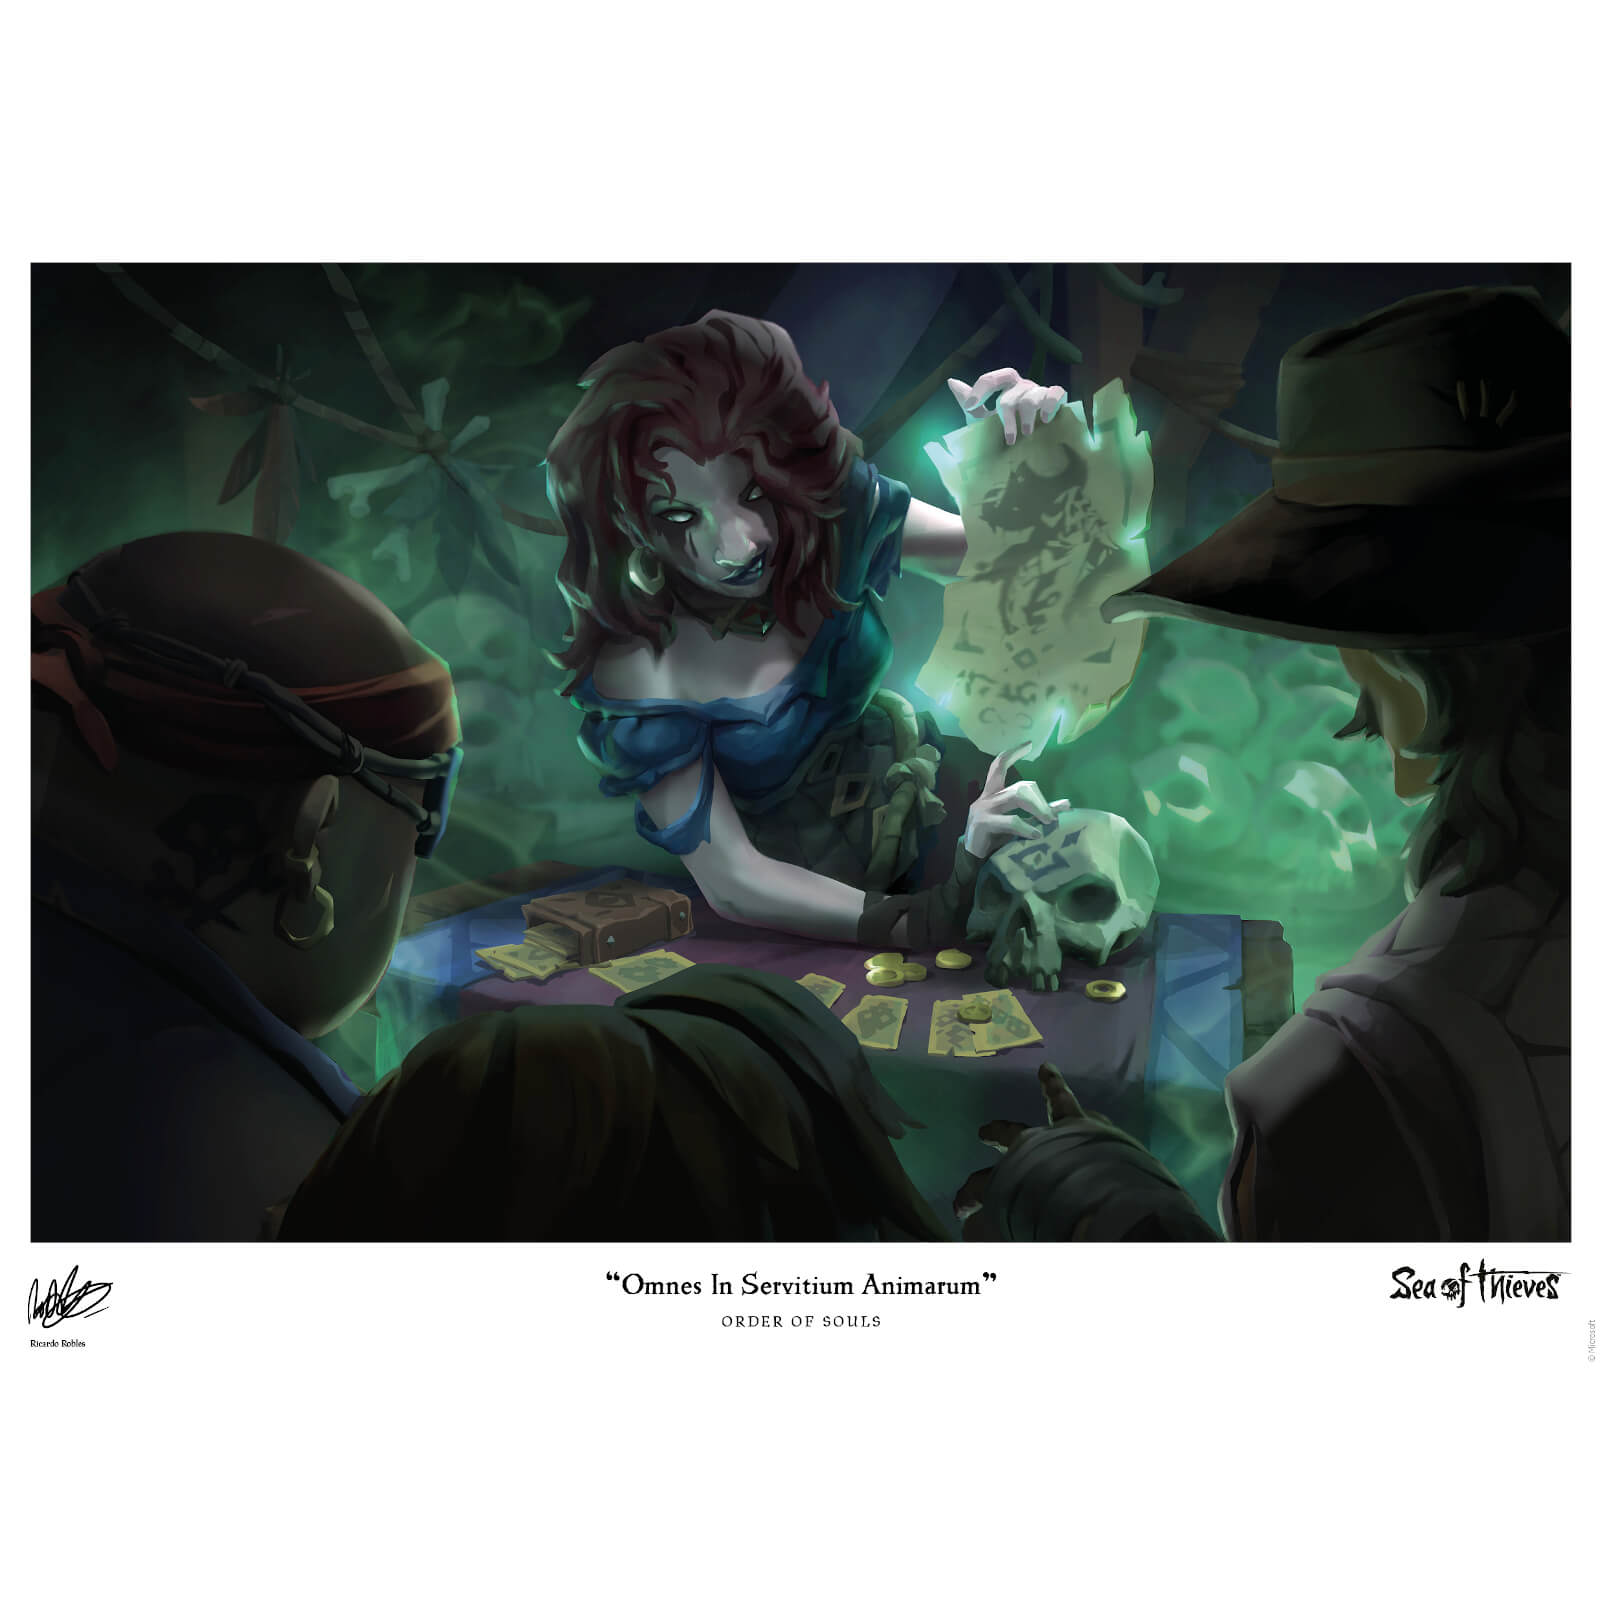 Rare Heritage Sea of Thieves Limited Edition Art Print - Order of Souls